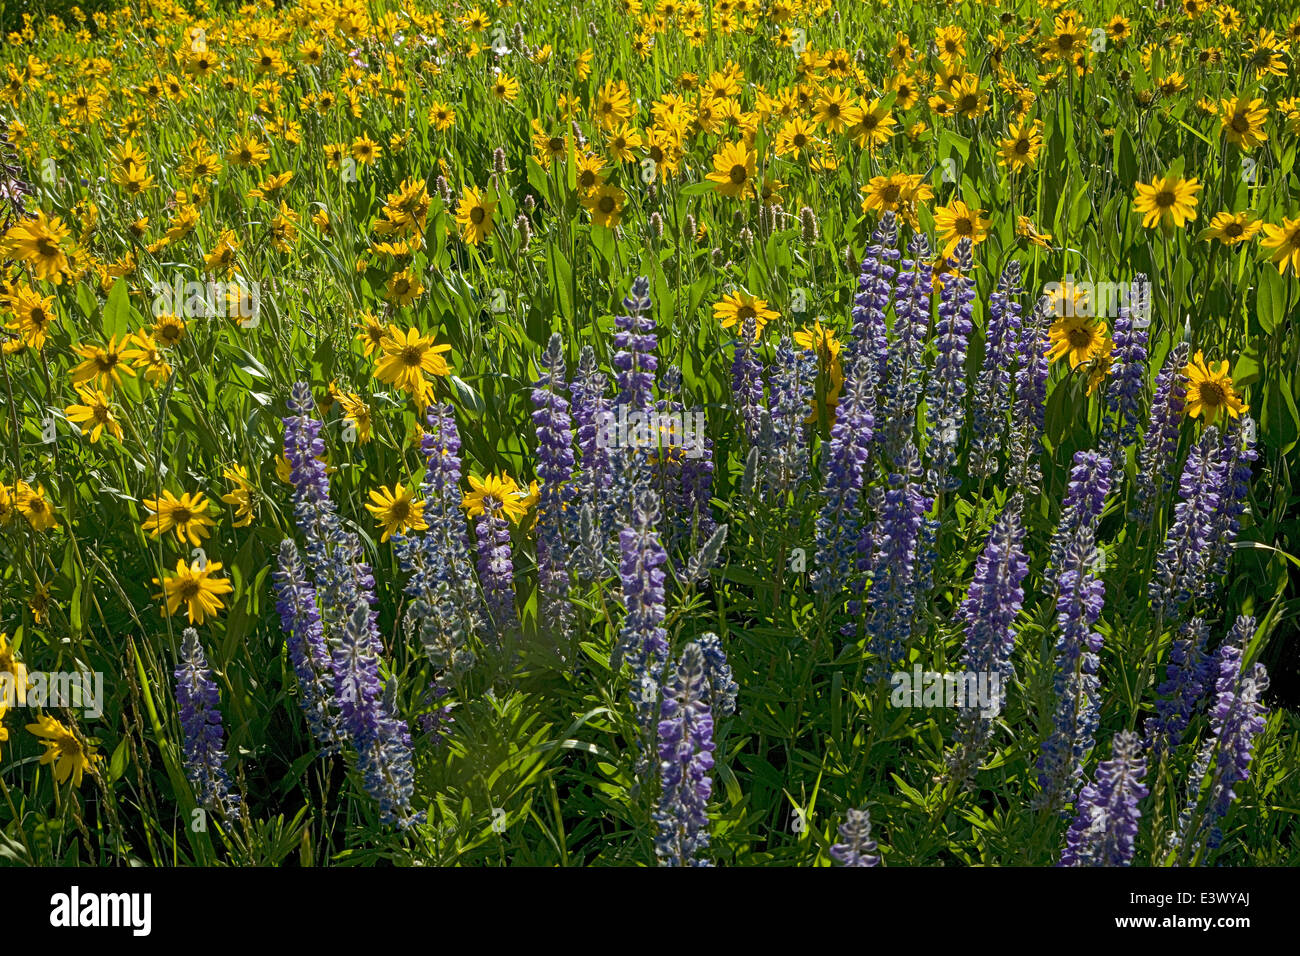 USA, Utah, Uinta-Wasatch-Cache National Forest, Little Cottonwood Canyon, Albion Basin, sunflowers and lupine Stock Photo